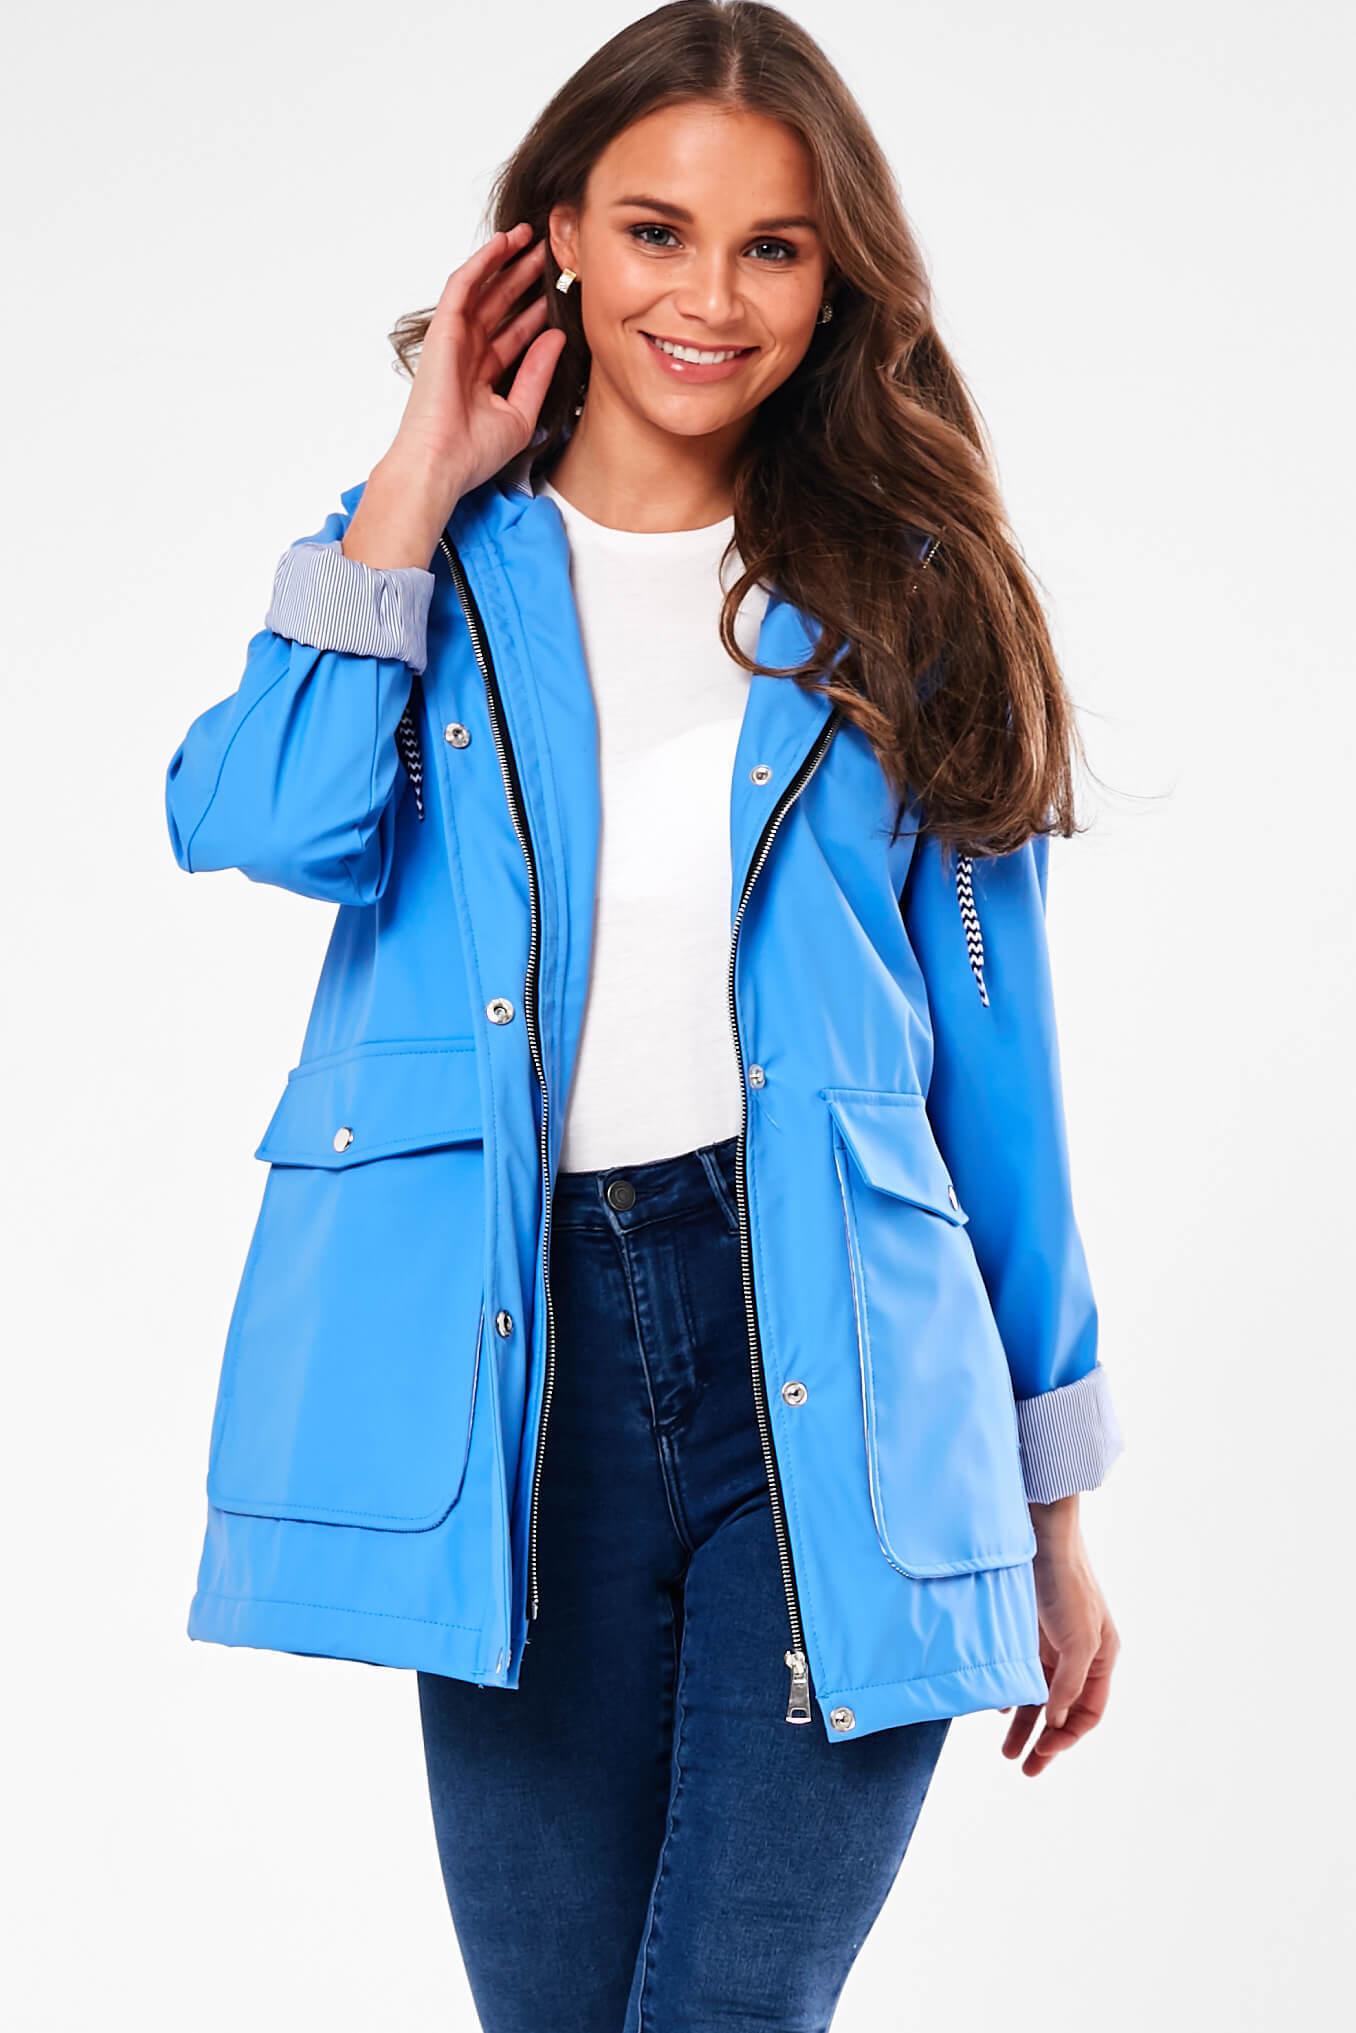 Rising Lilly Stripe Lined Raincoat in Cornflower Blue | iCLOTHING ...